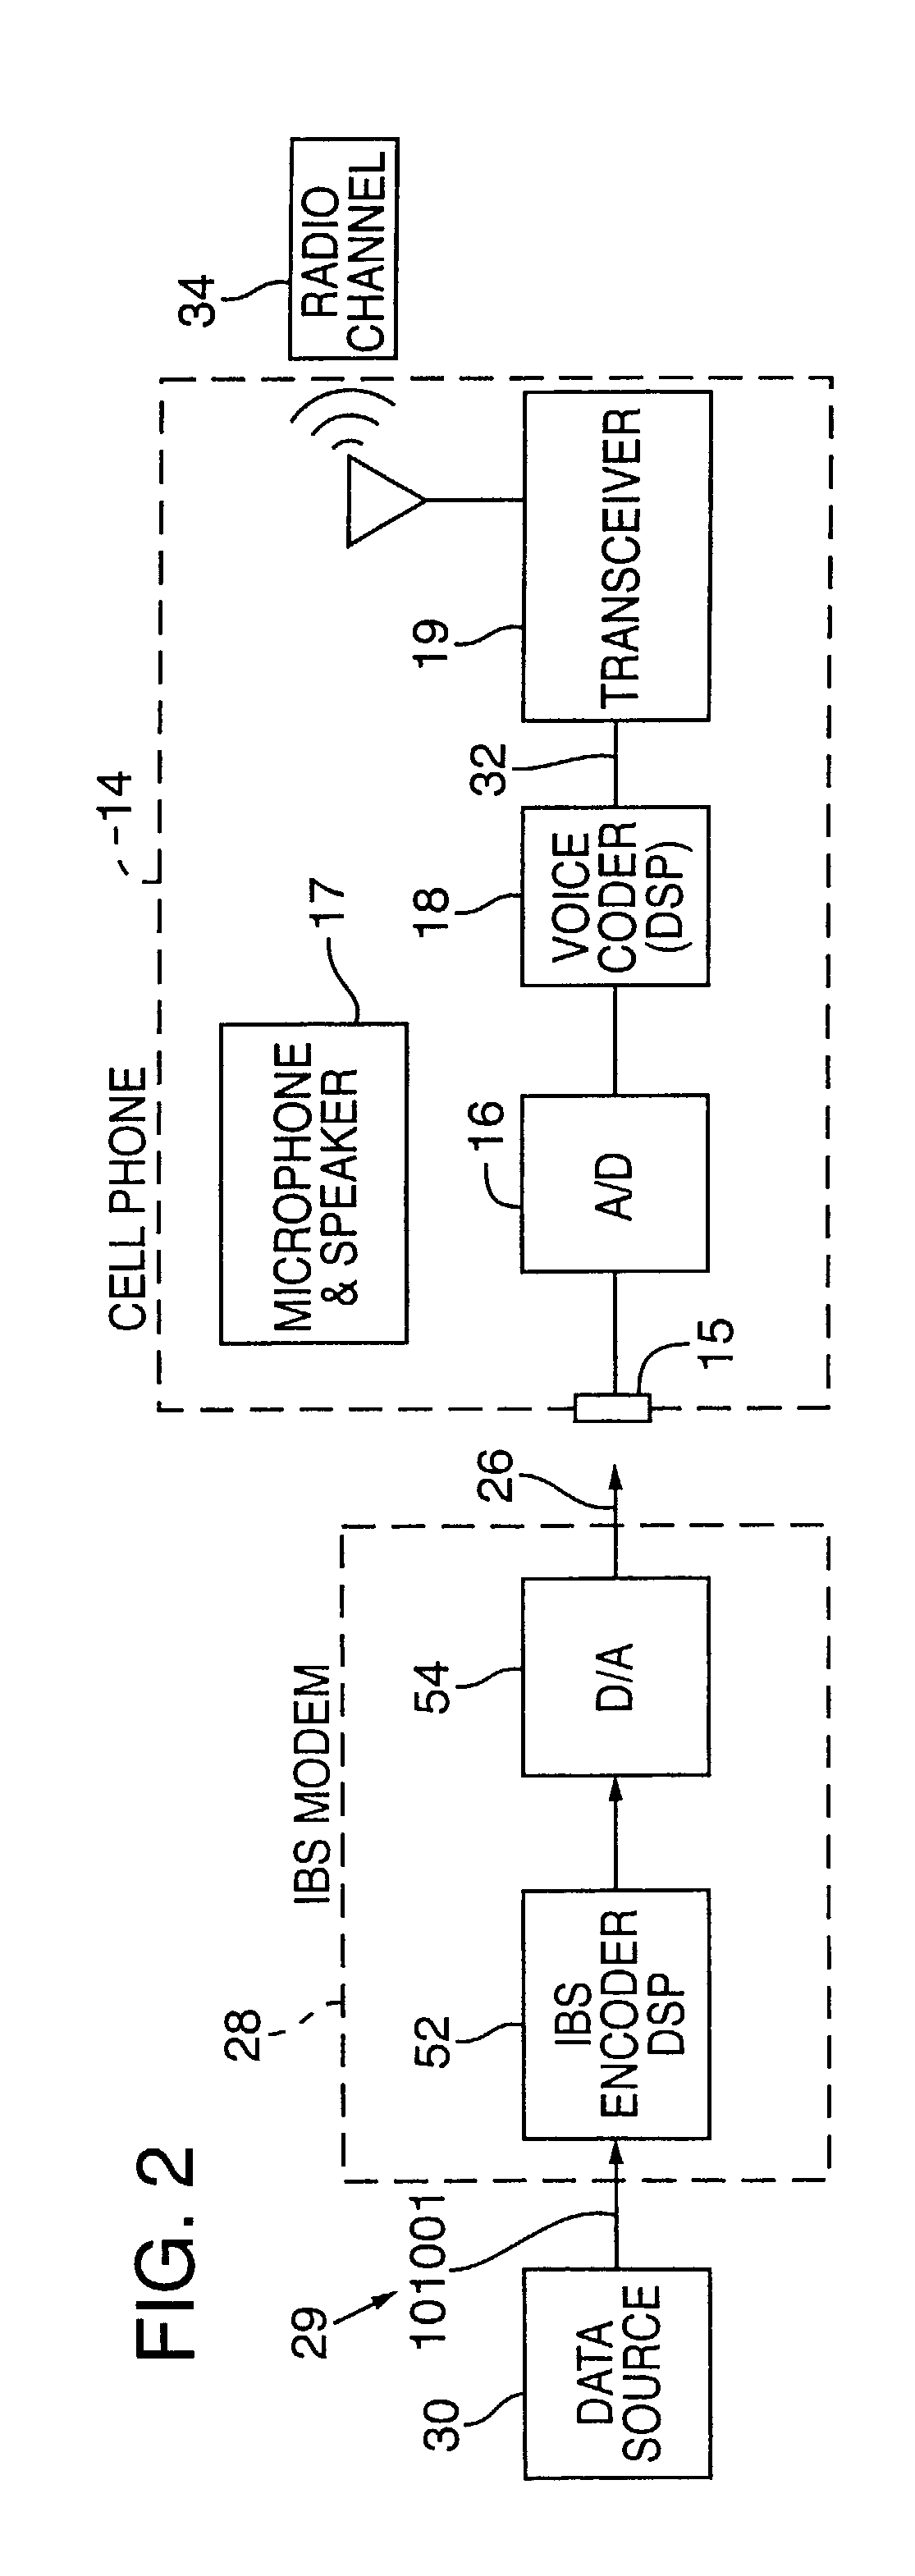 Synchronizer for use with improved in-band signaling for data communications over digital wireless telecommunications networks